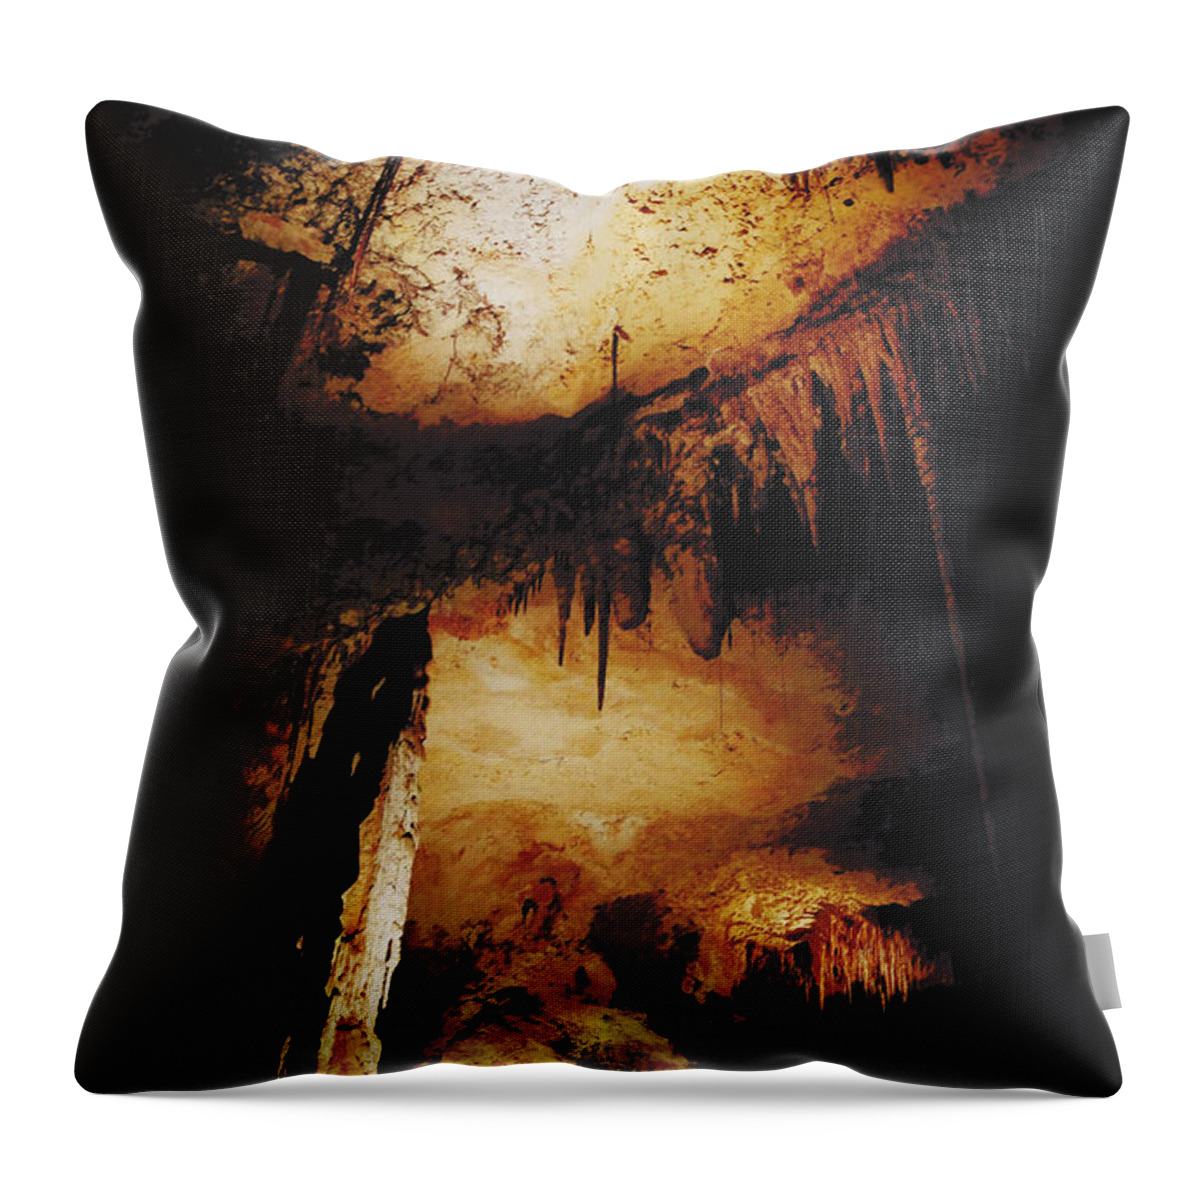 Jewel Cave Throw Pillow featuring the photograph Jewel Cave V by Cassandra Buckley